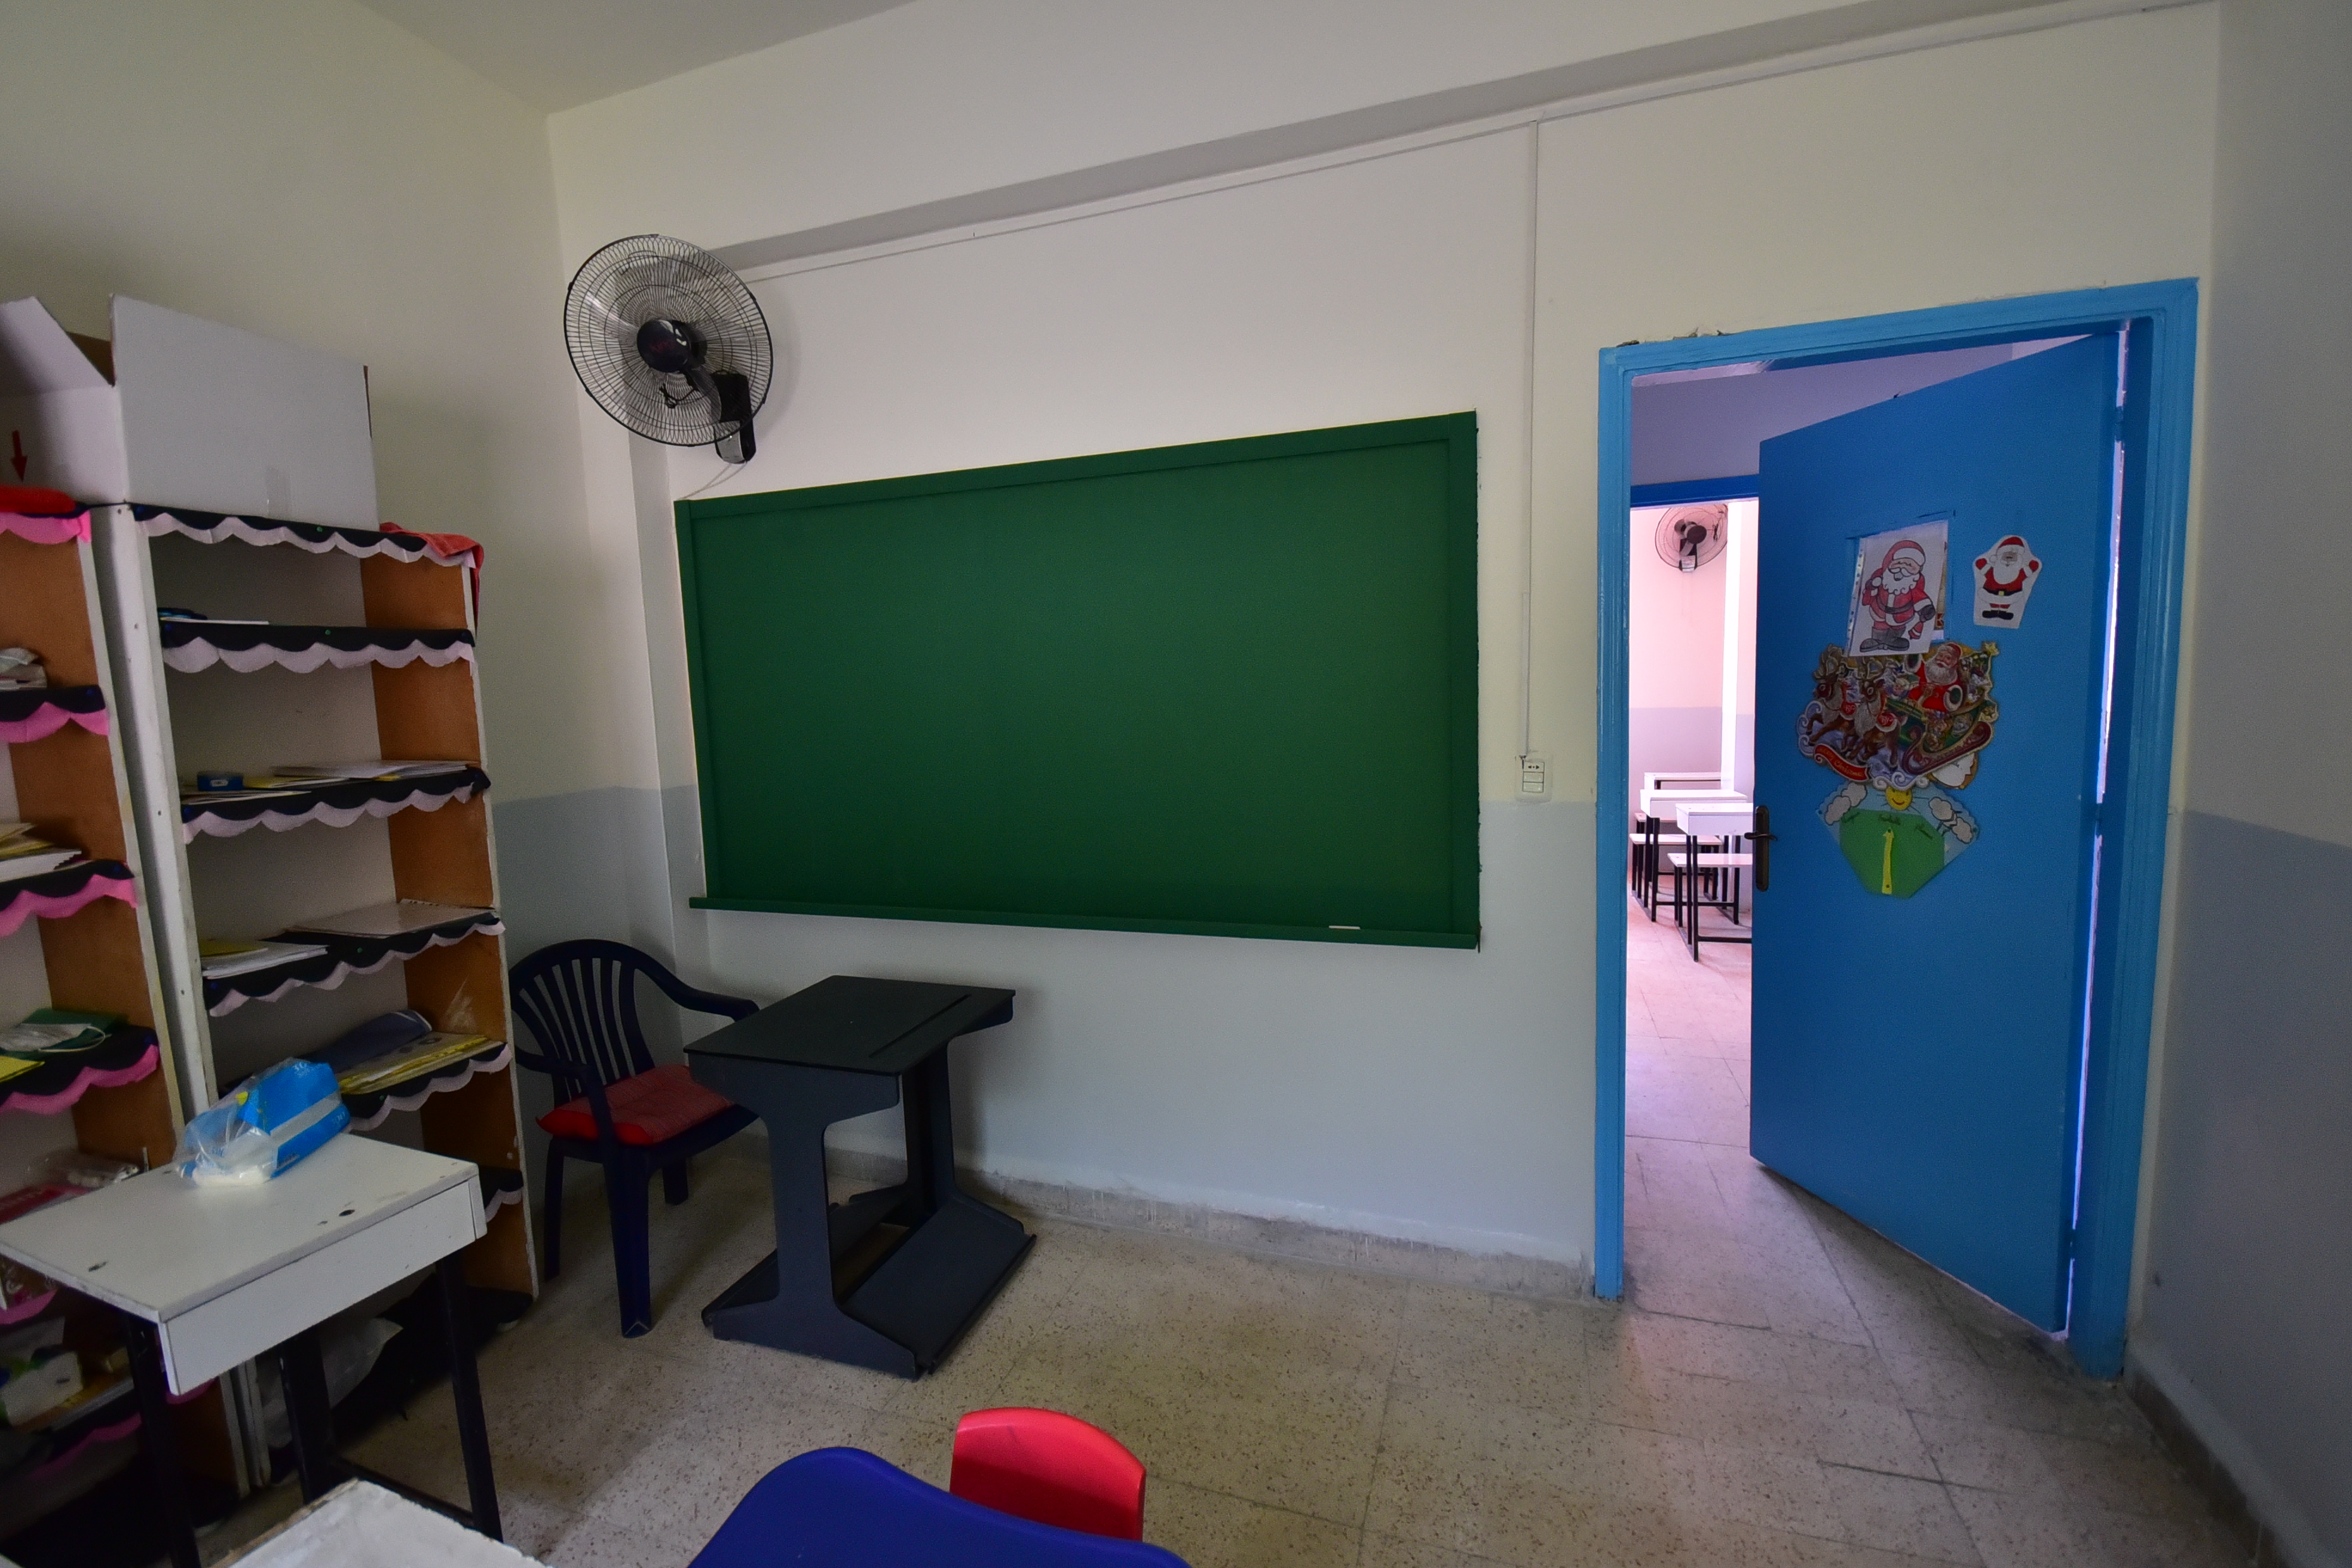  Beirut - Renovation of the Saint Joseph Brothers School and access to education for vulnerable c-4